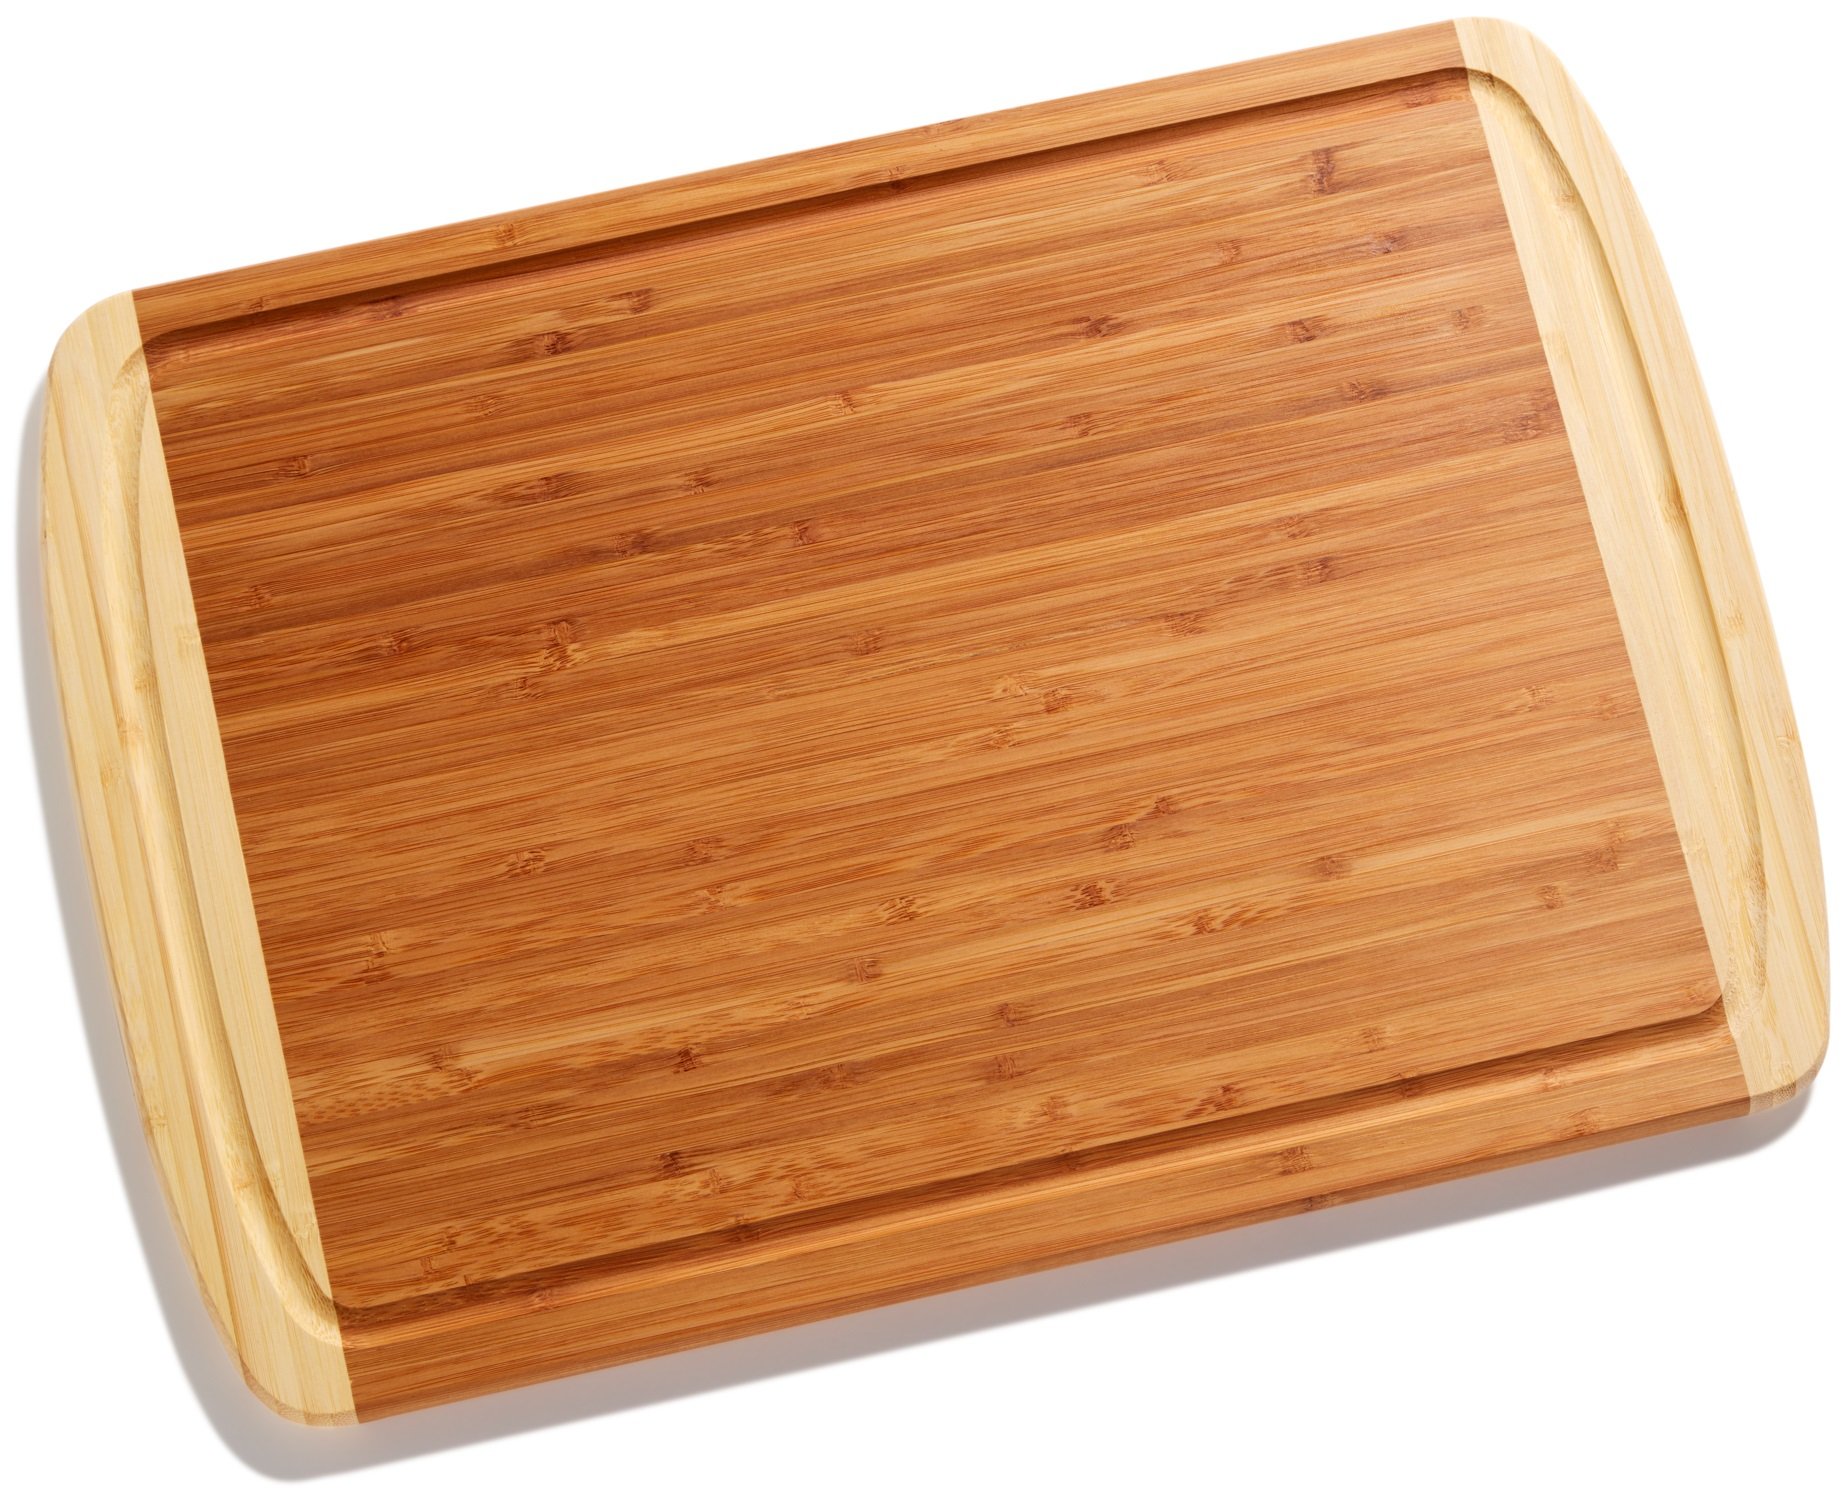 Greener Chef MASSIVE XXXL Extra Large Bamboo Cutting Board – Wooden Carving Board for Turkey, Meat, Vegetables, BBQ - LARGEST Wood Butcher Block Boards with Handles, Juice Groove